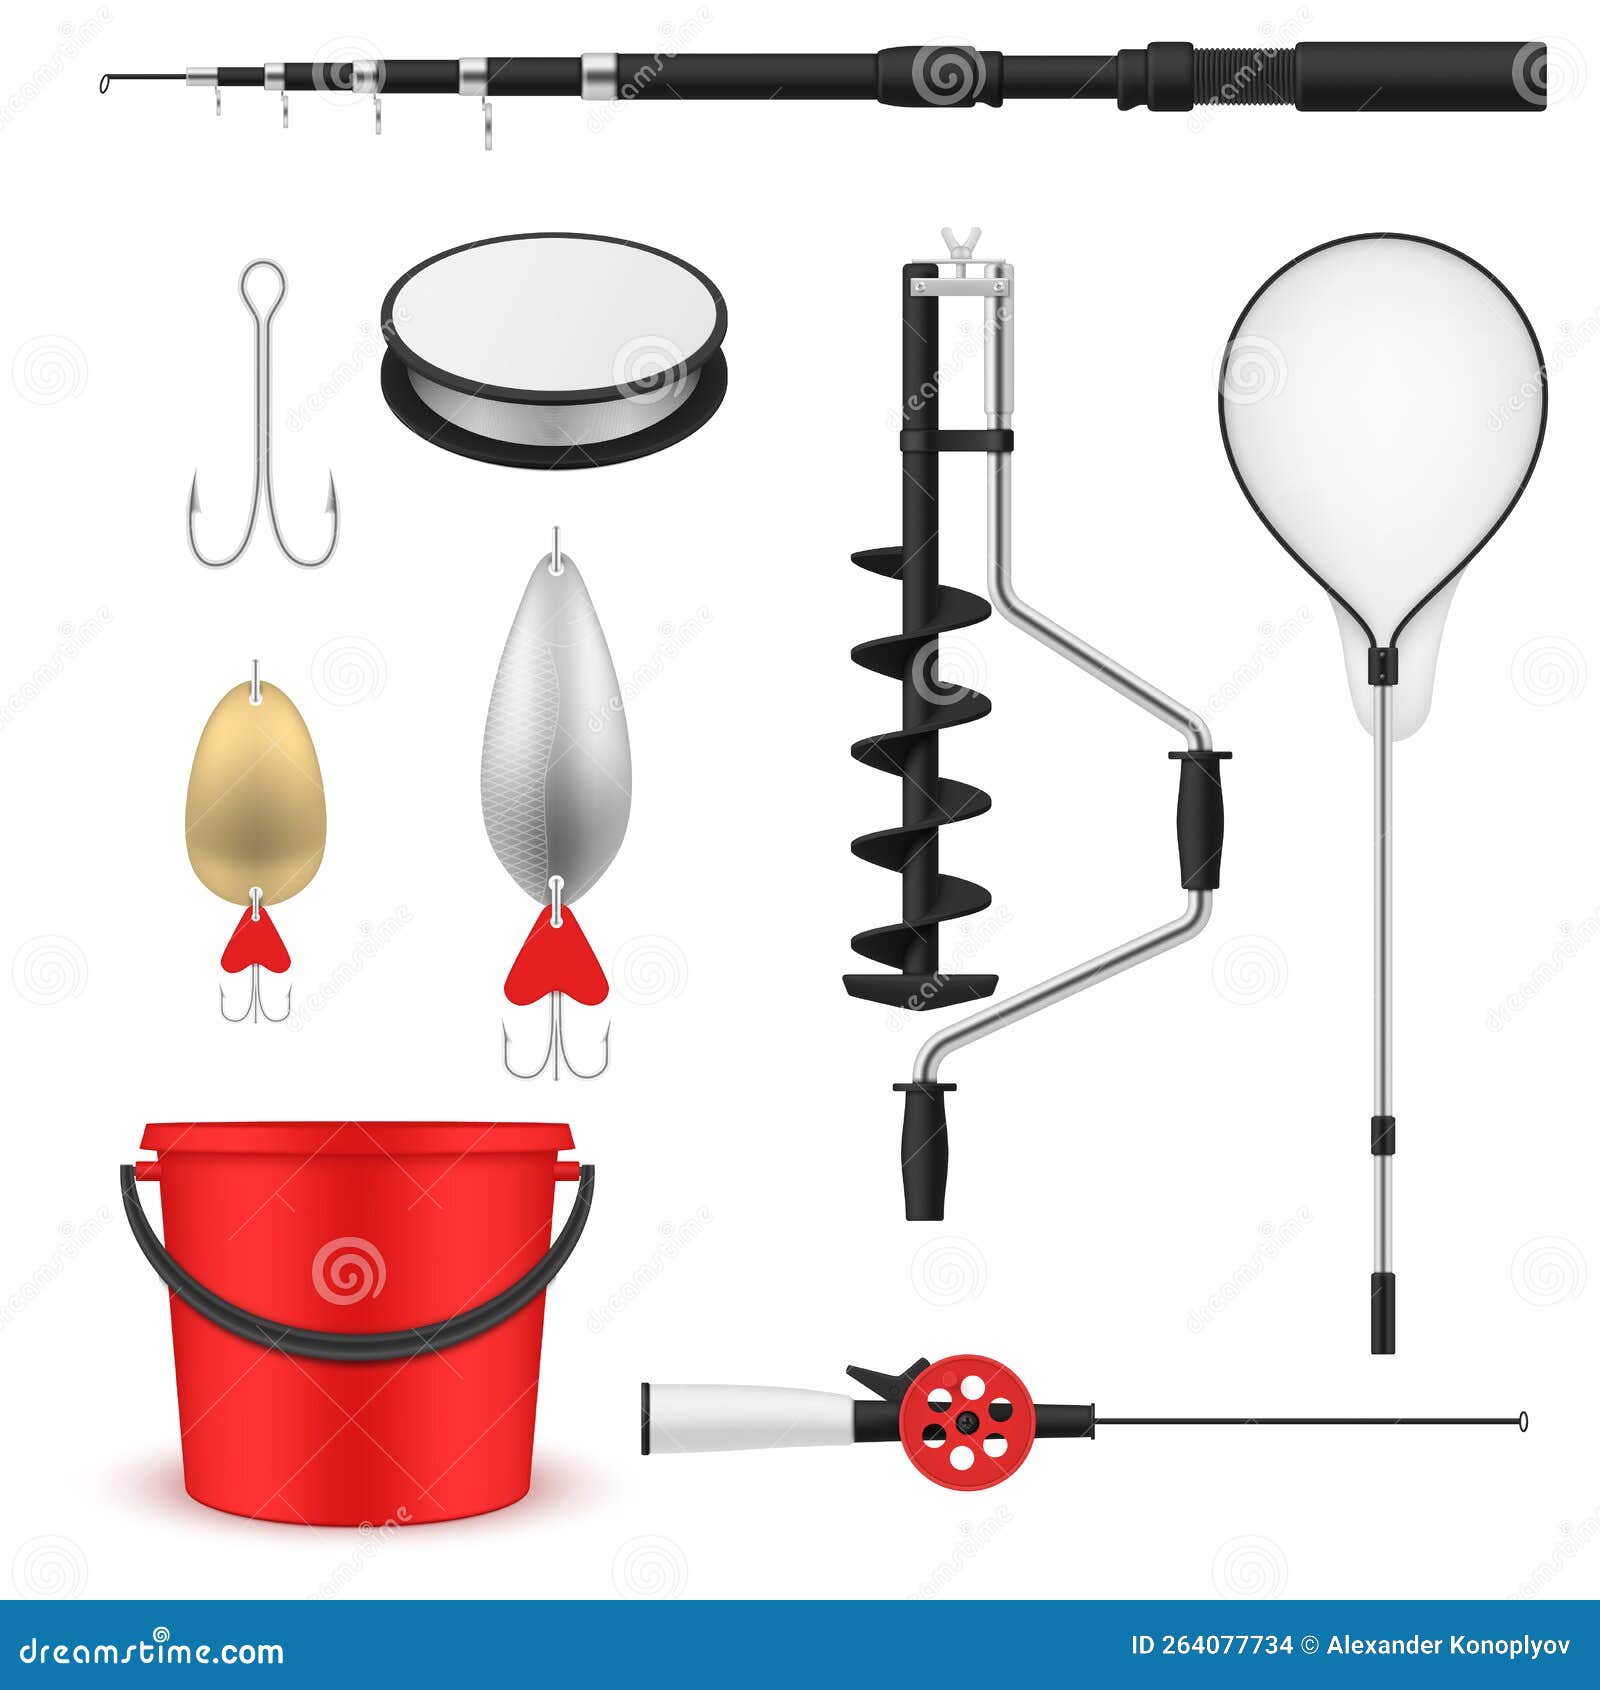 Fishing Equipment Set Realistic Vector Fish Catching Hook Baubles Drill  Spinning Bucket Stock Illustration - Illustration of equipment, baubles:  264077734